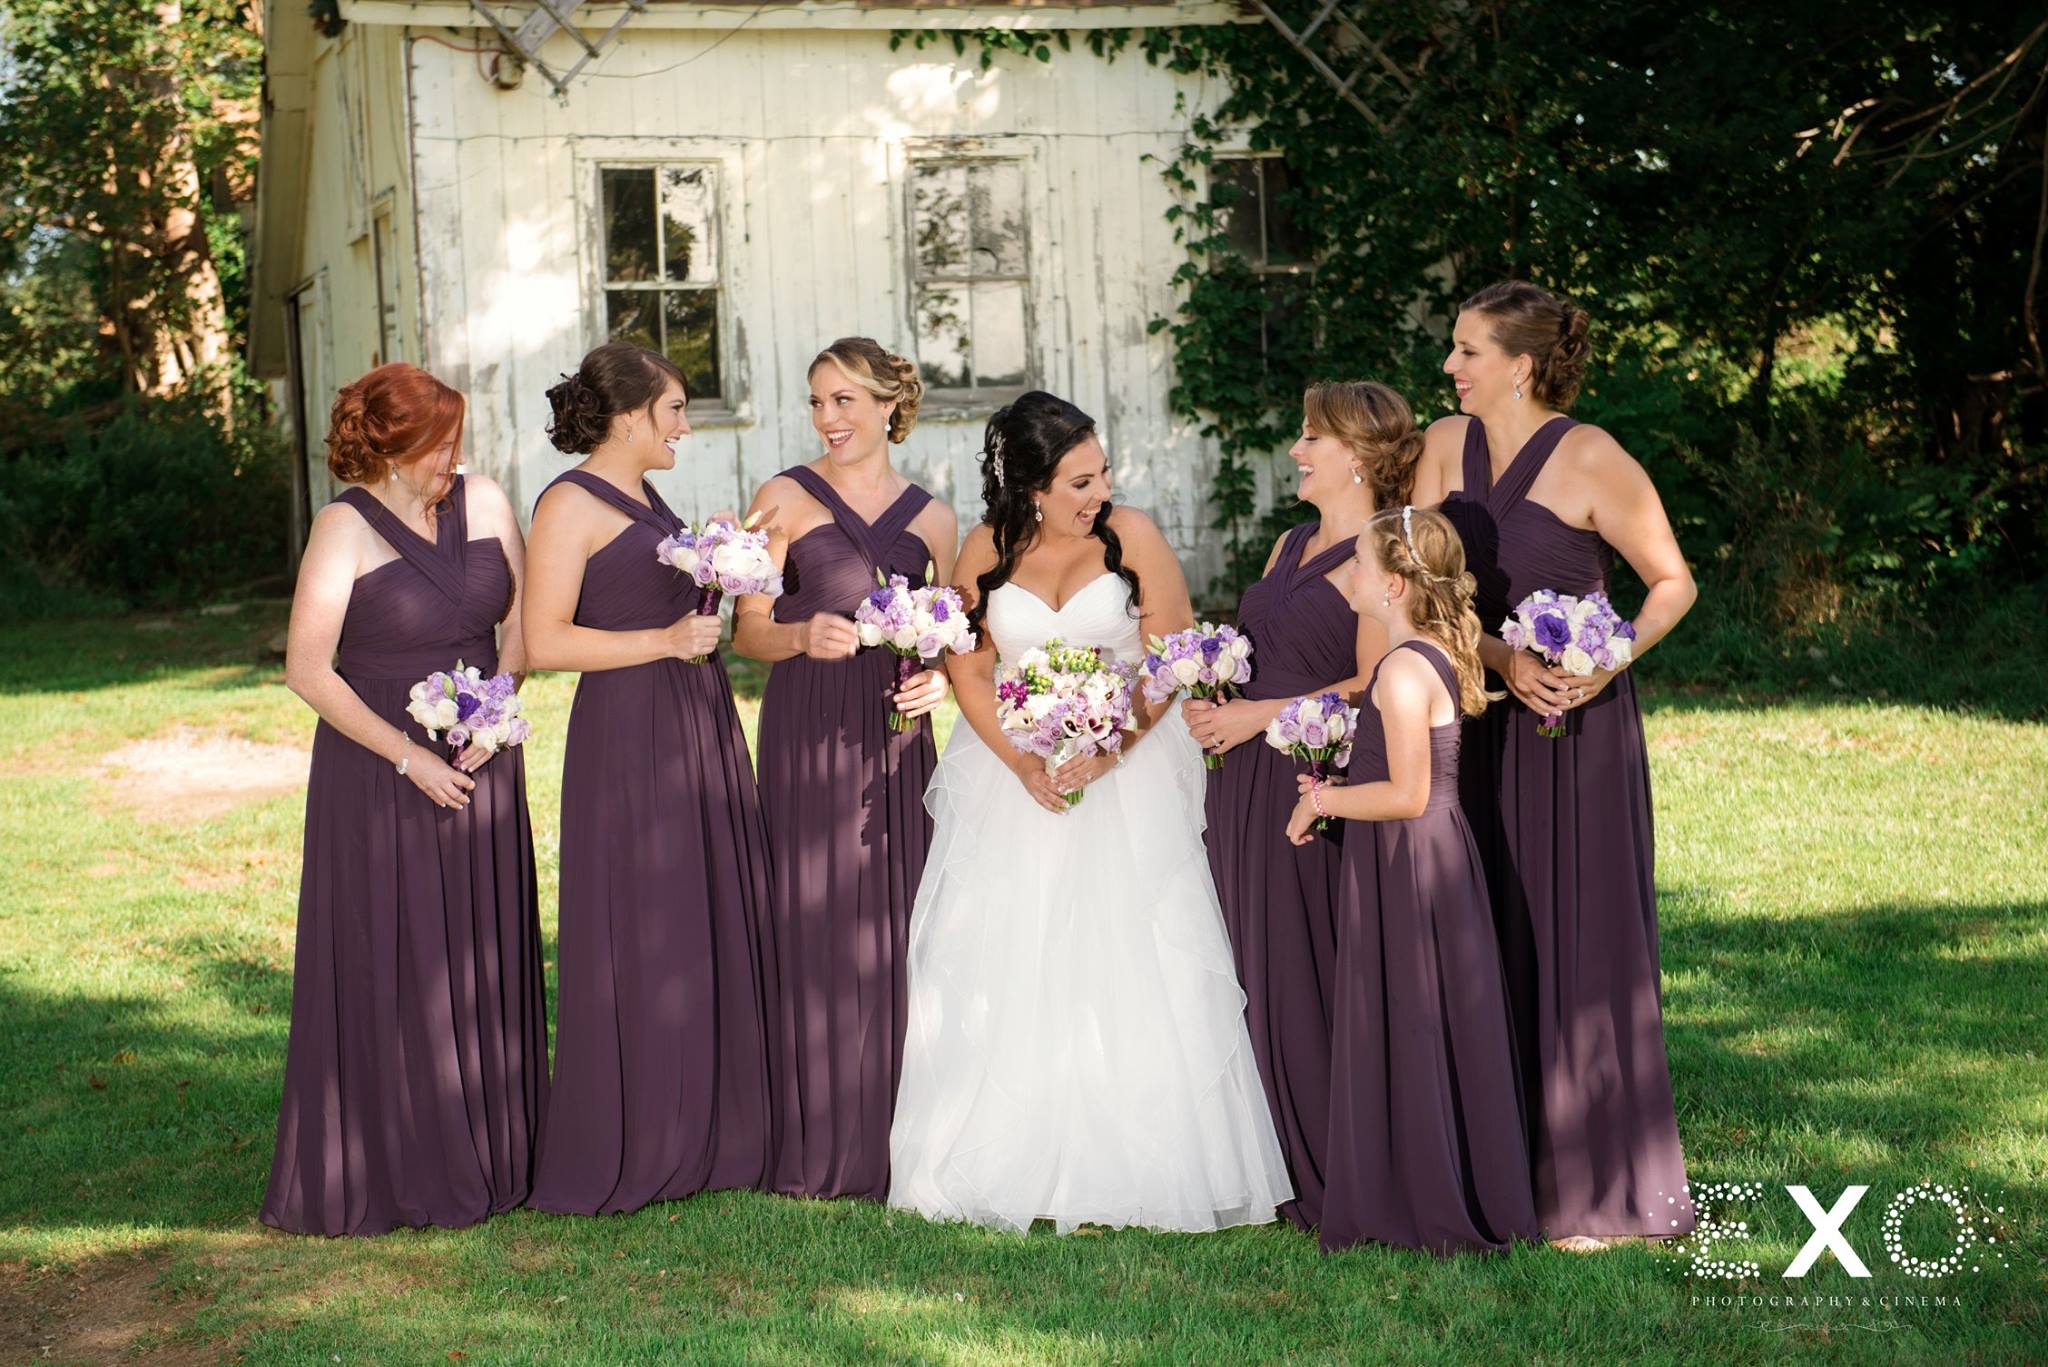 bride wearing Burton Bridals gown and bridesmaids wearing Nordstrom dresses